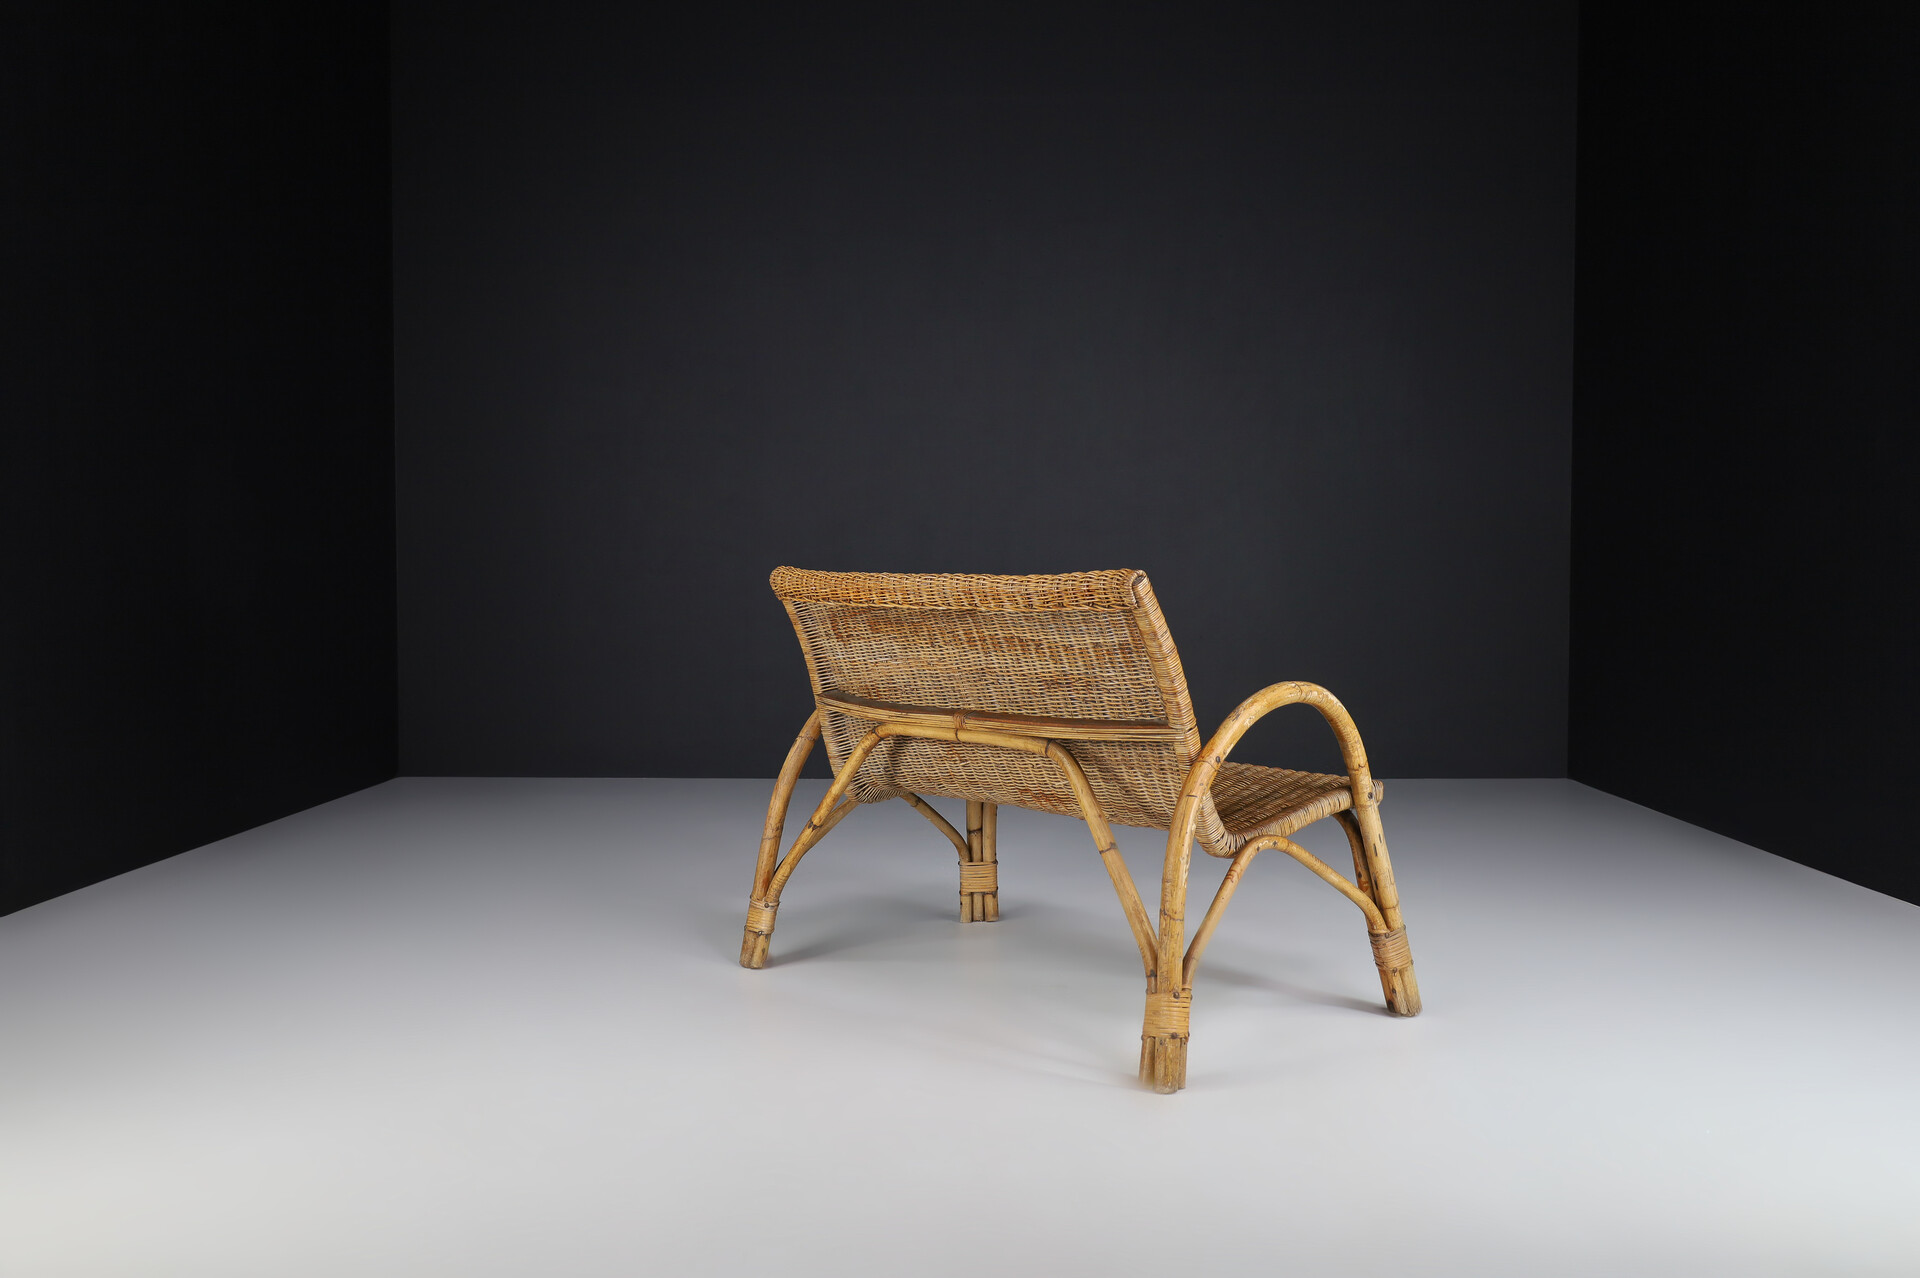 Mid century modern Bamboo and wicker bench, France 1960s Mid-20th century